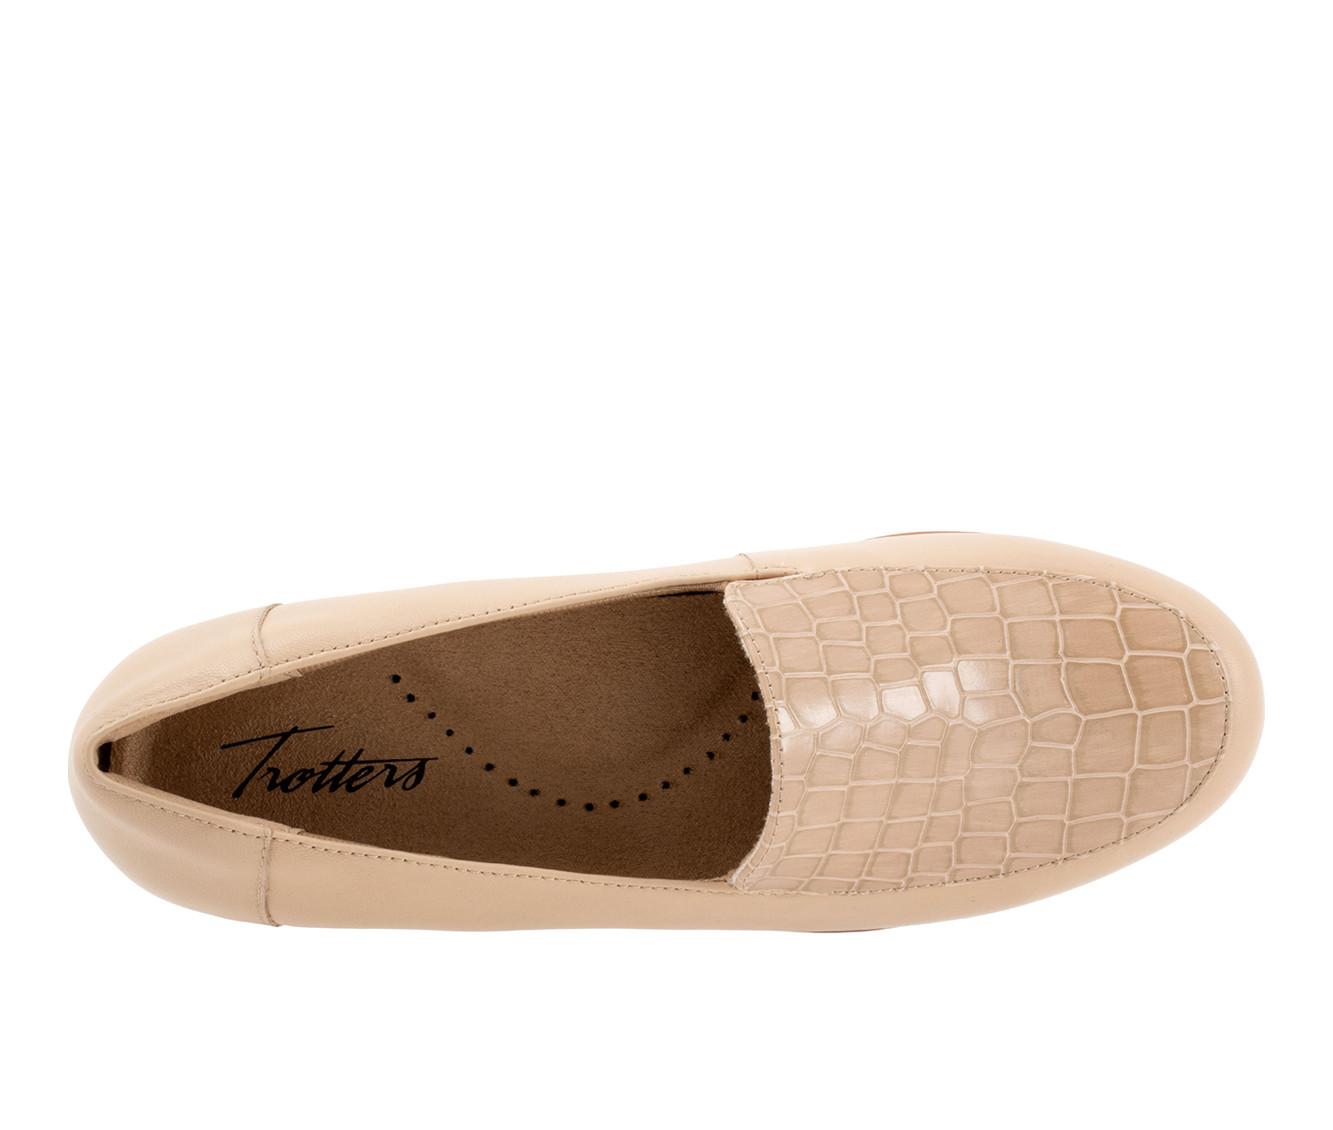 Women's Trotters Deanna Loafers